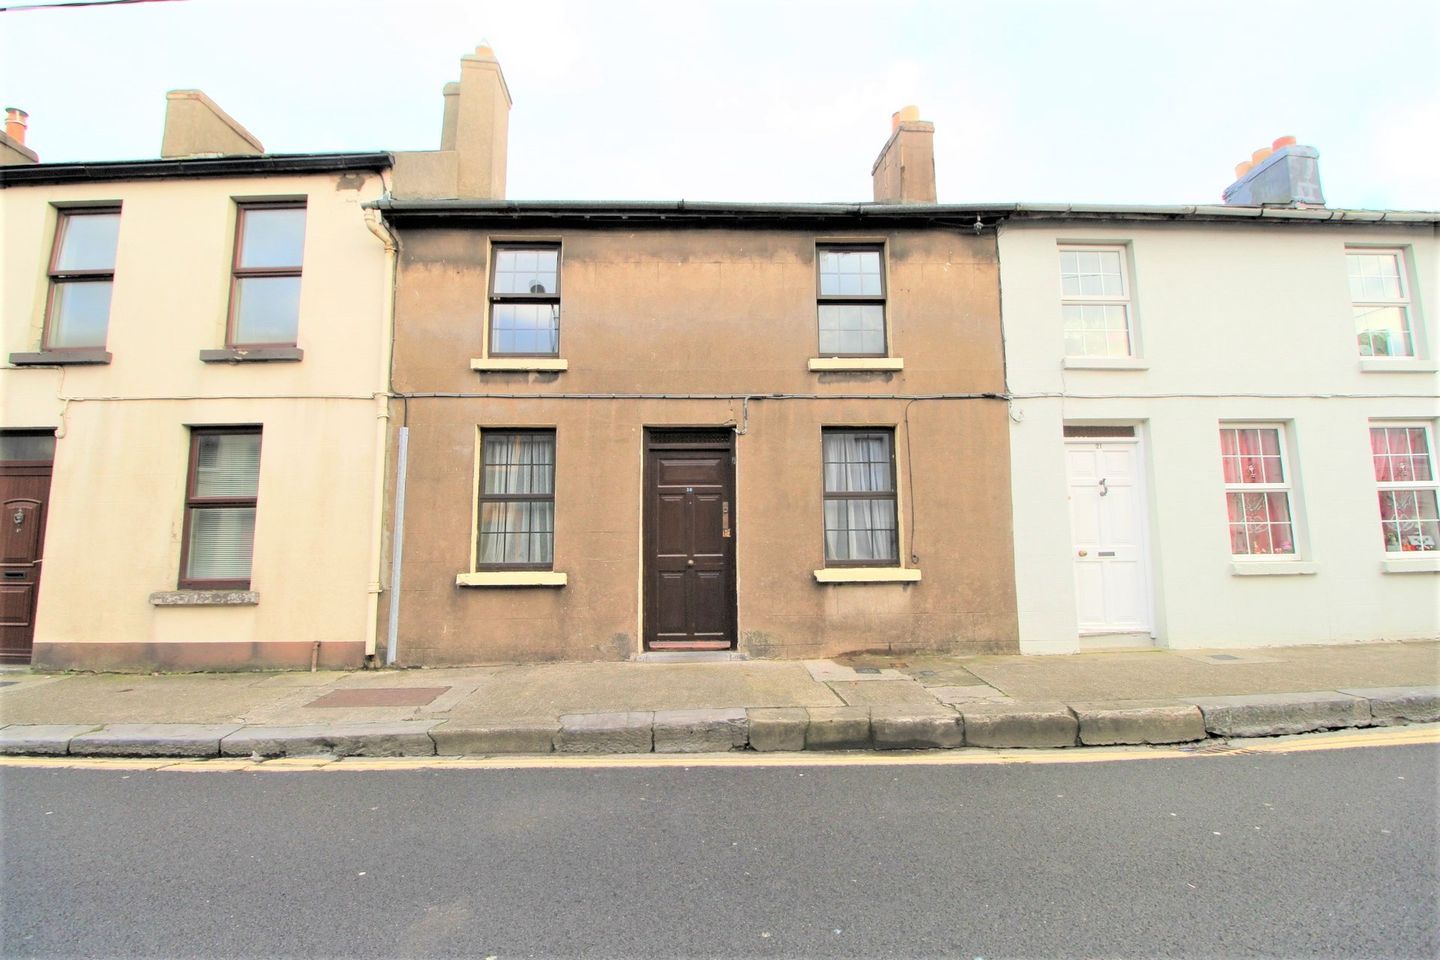 20 Johnstown, Waterford City, Co. Waterford